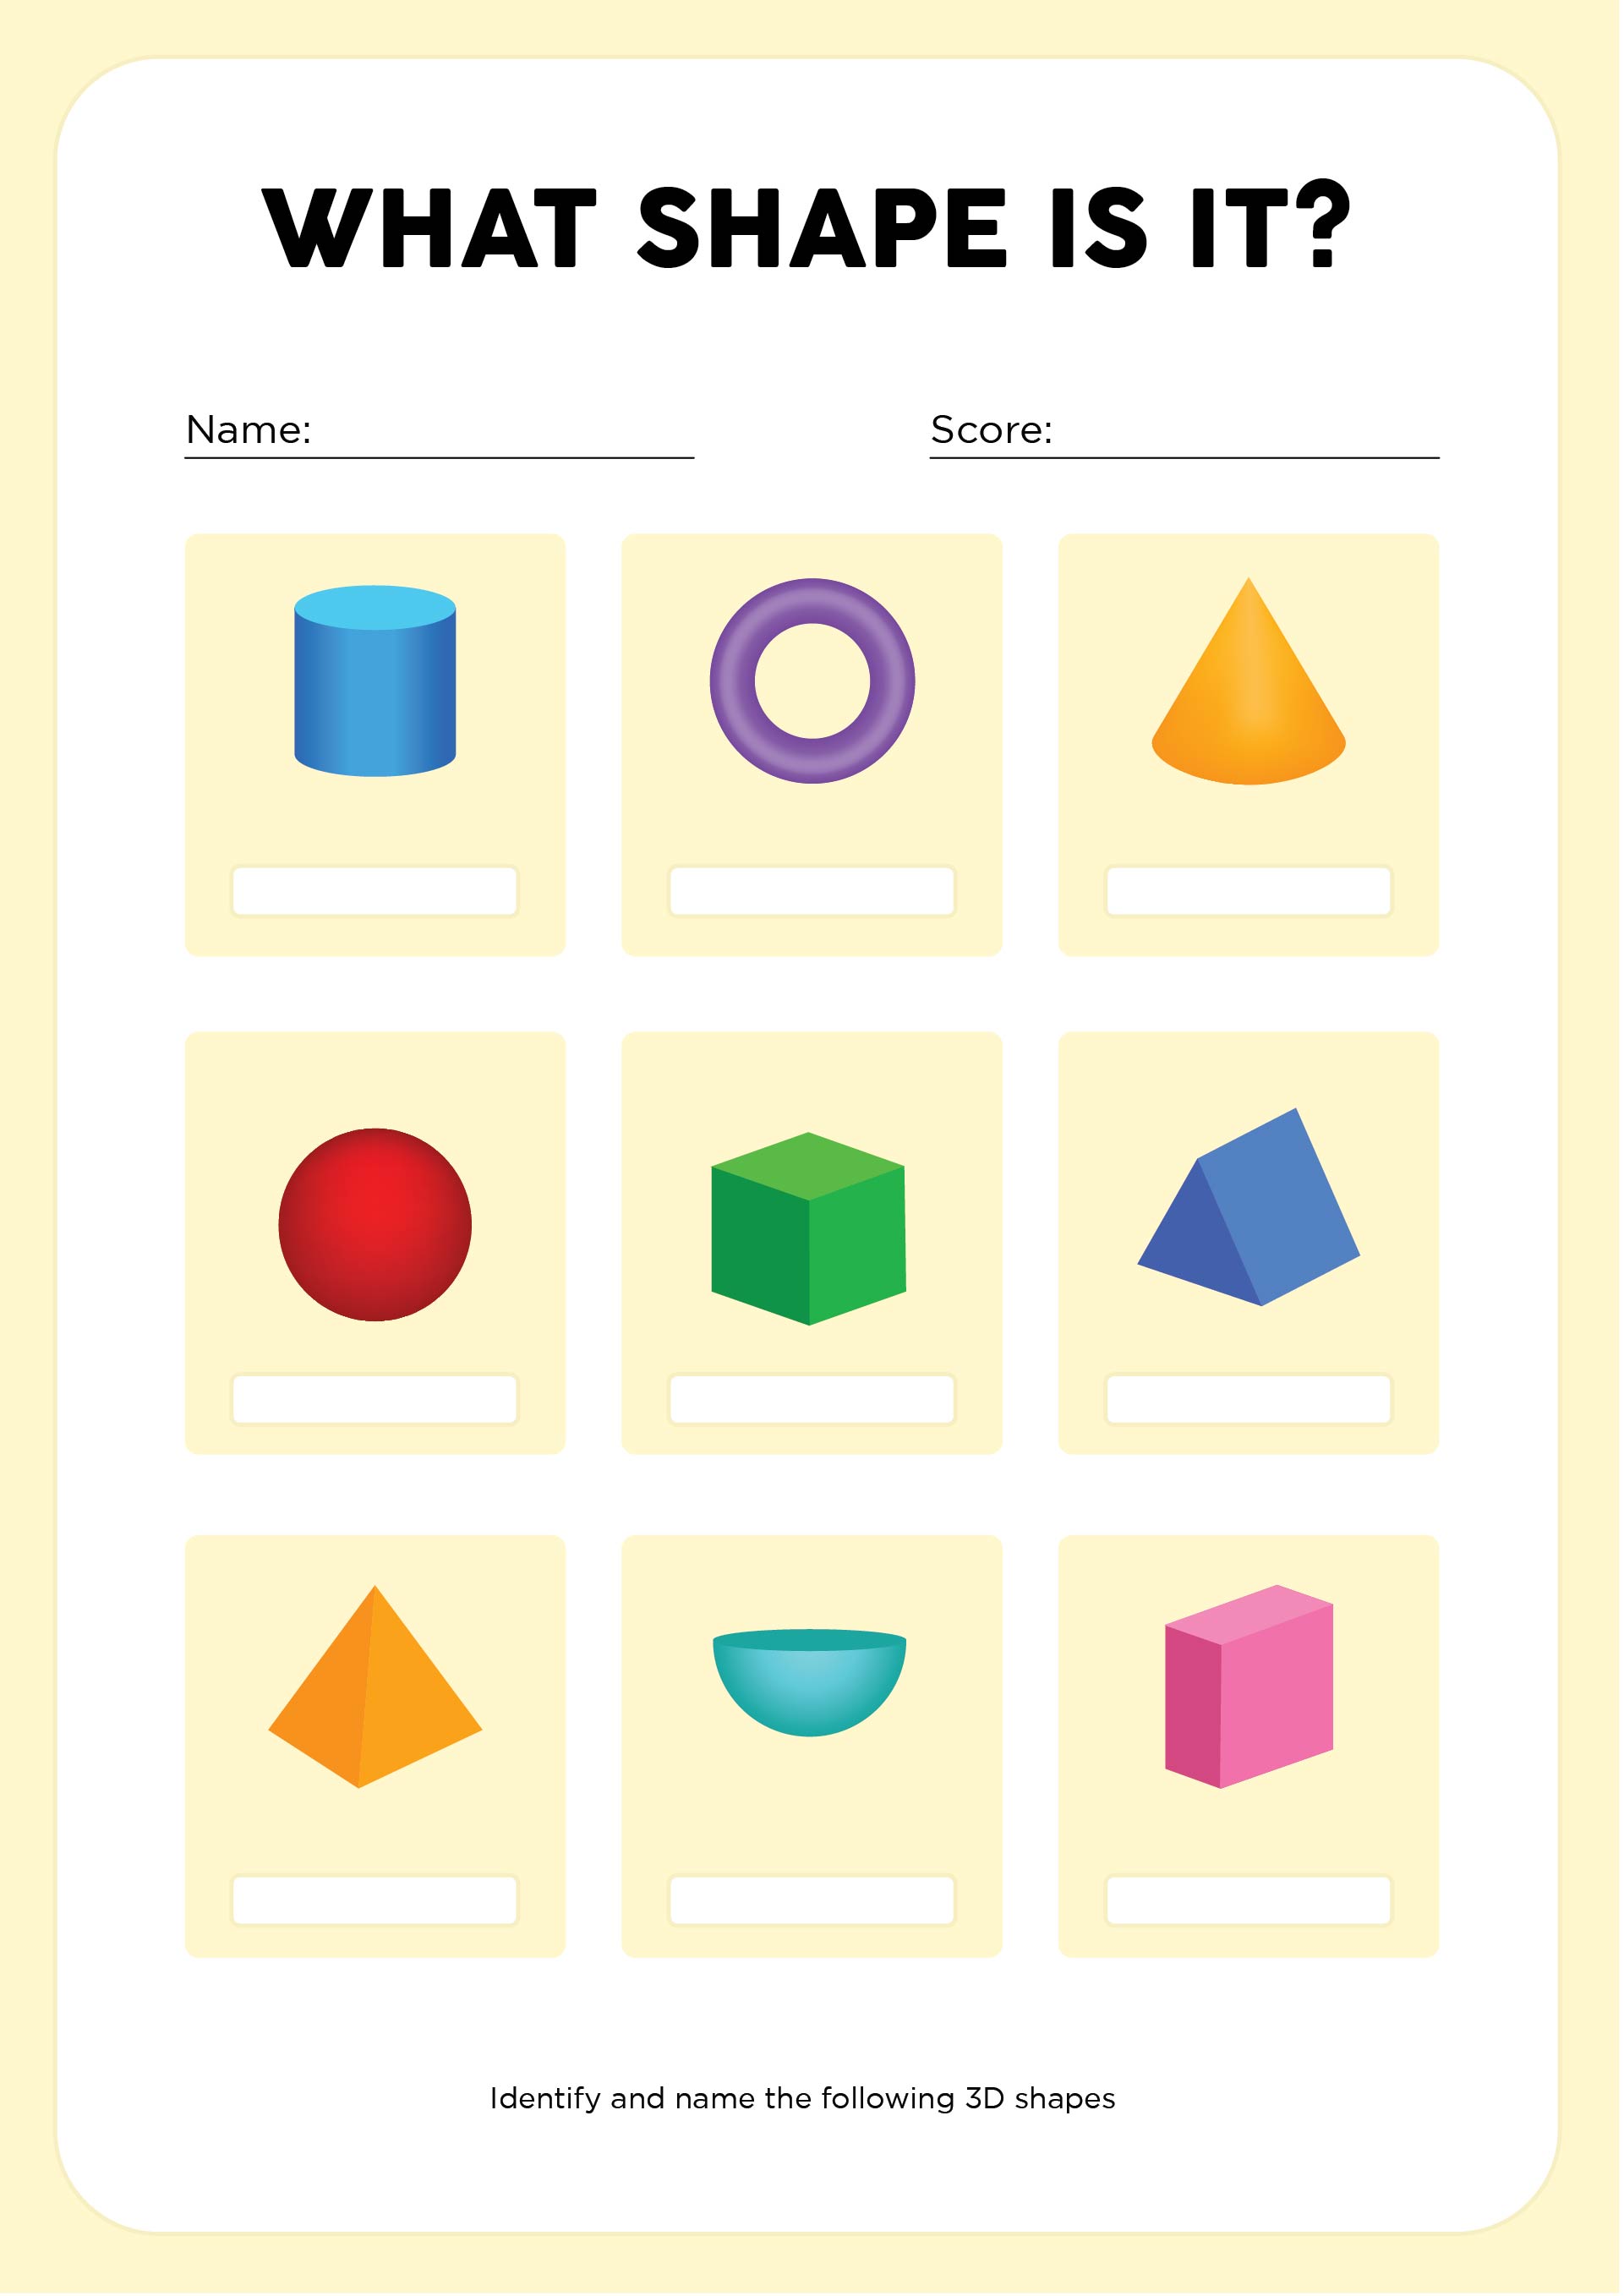 3D Shapes Worksheets and Printables